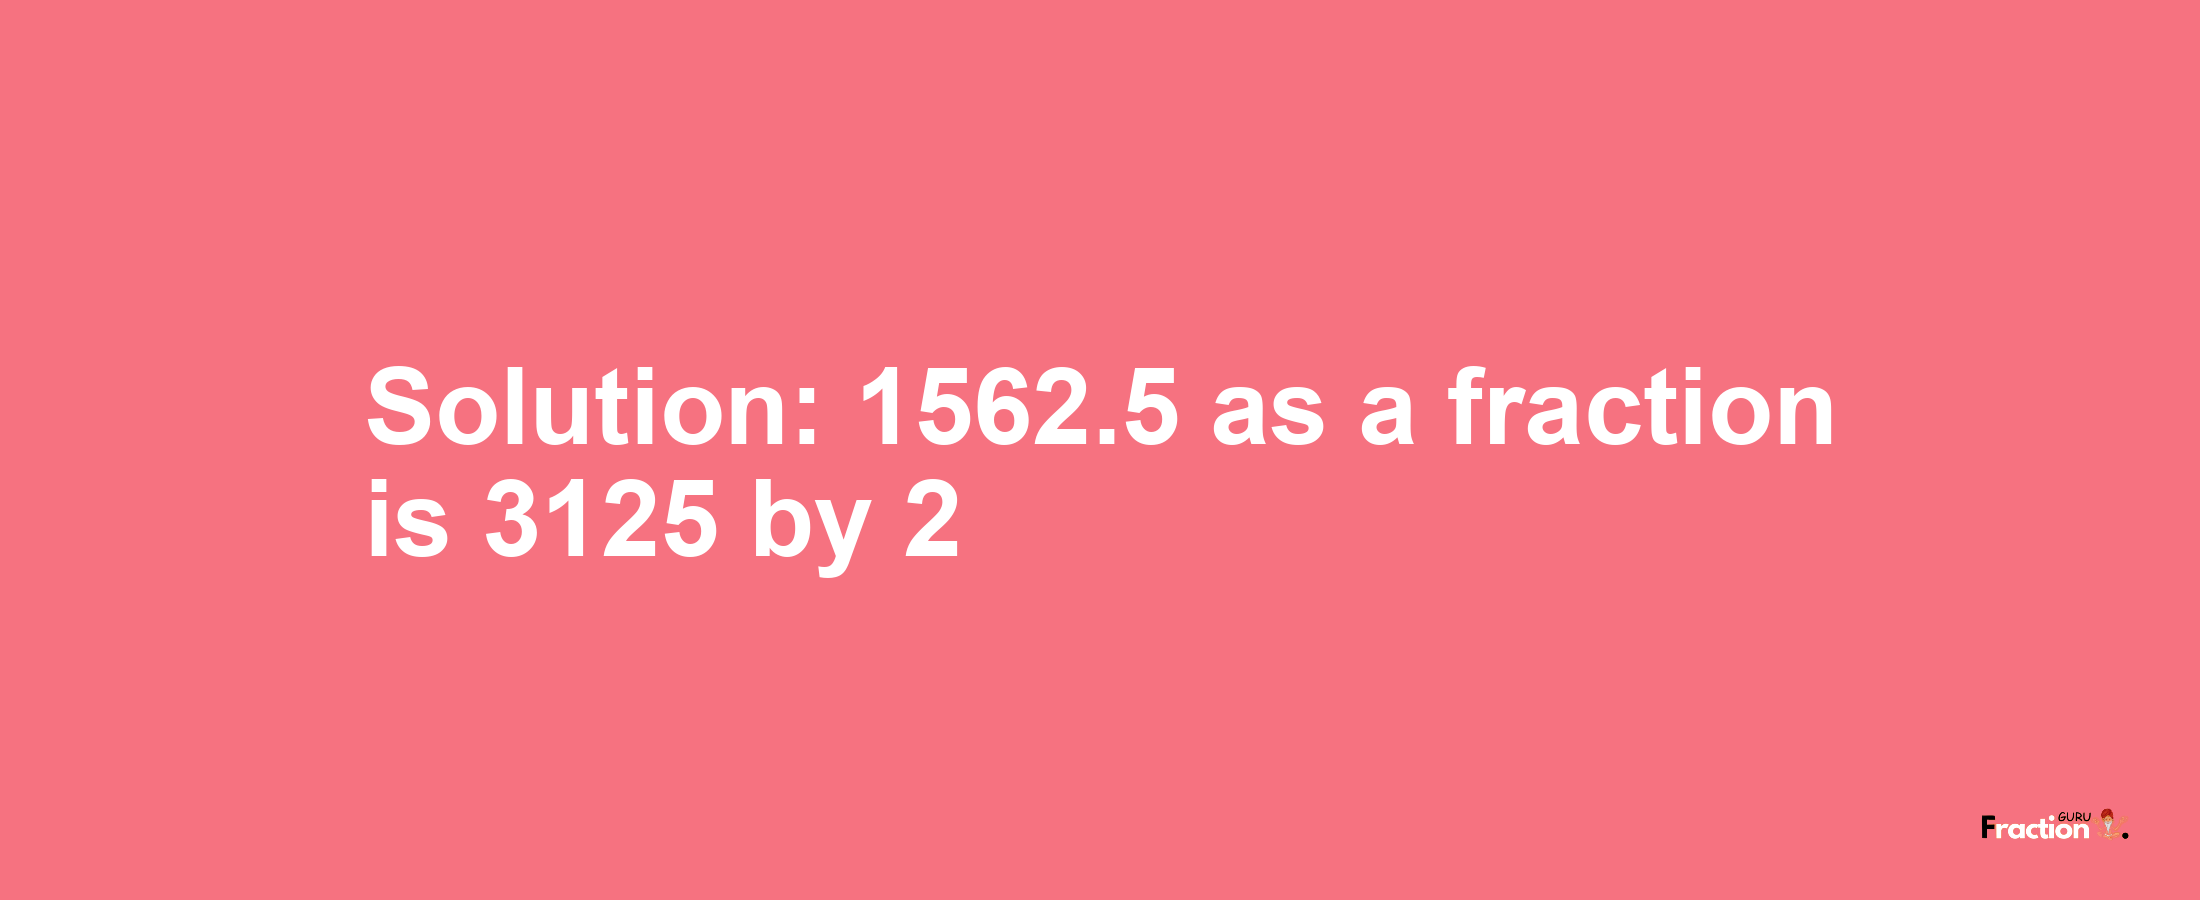 Solution:1562.5 as a fraction is 3125/2